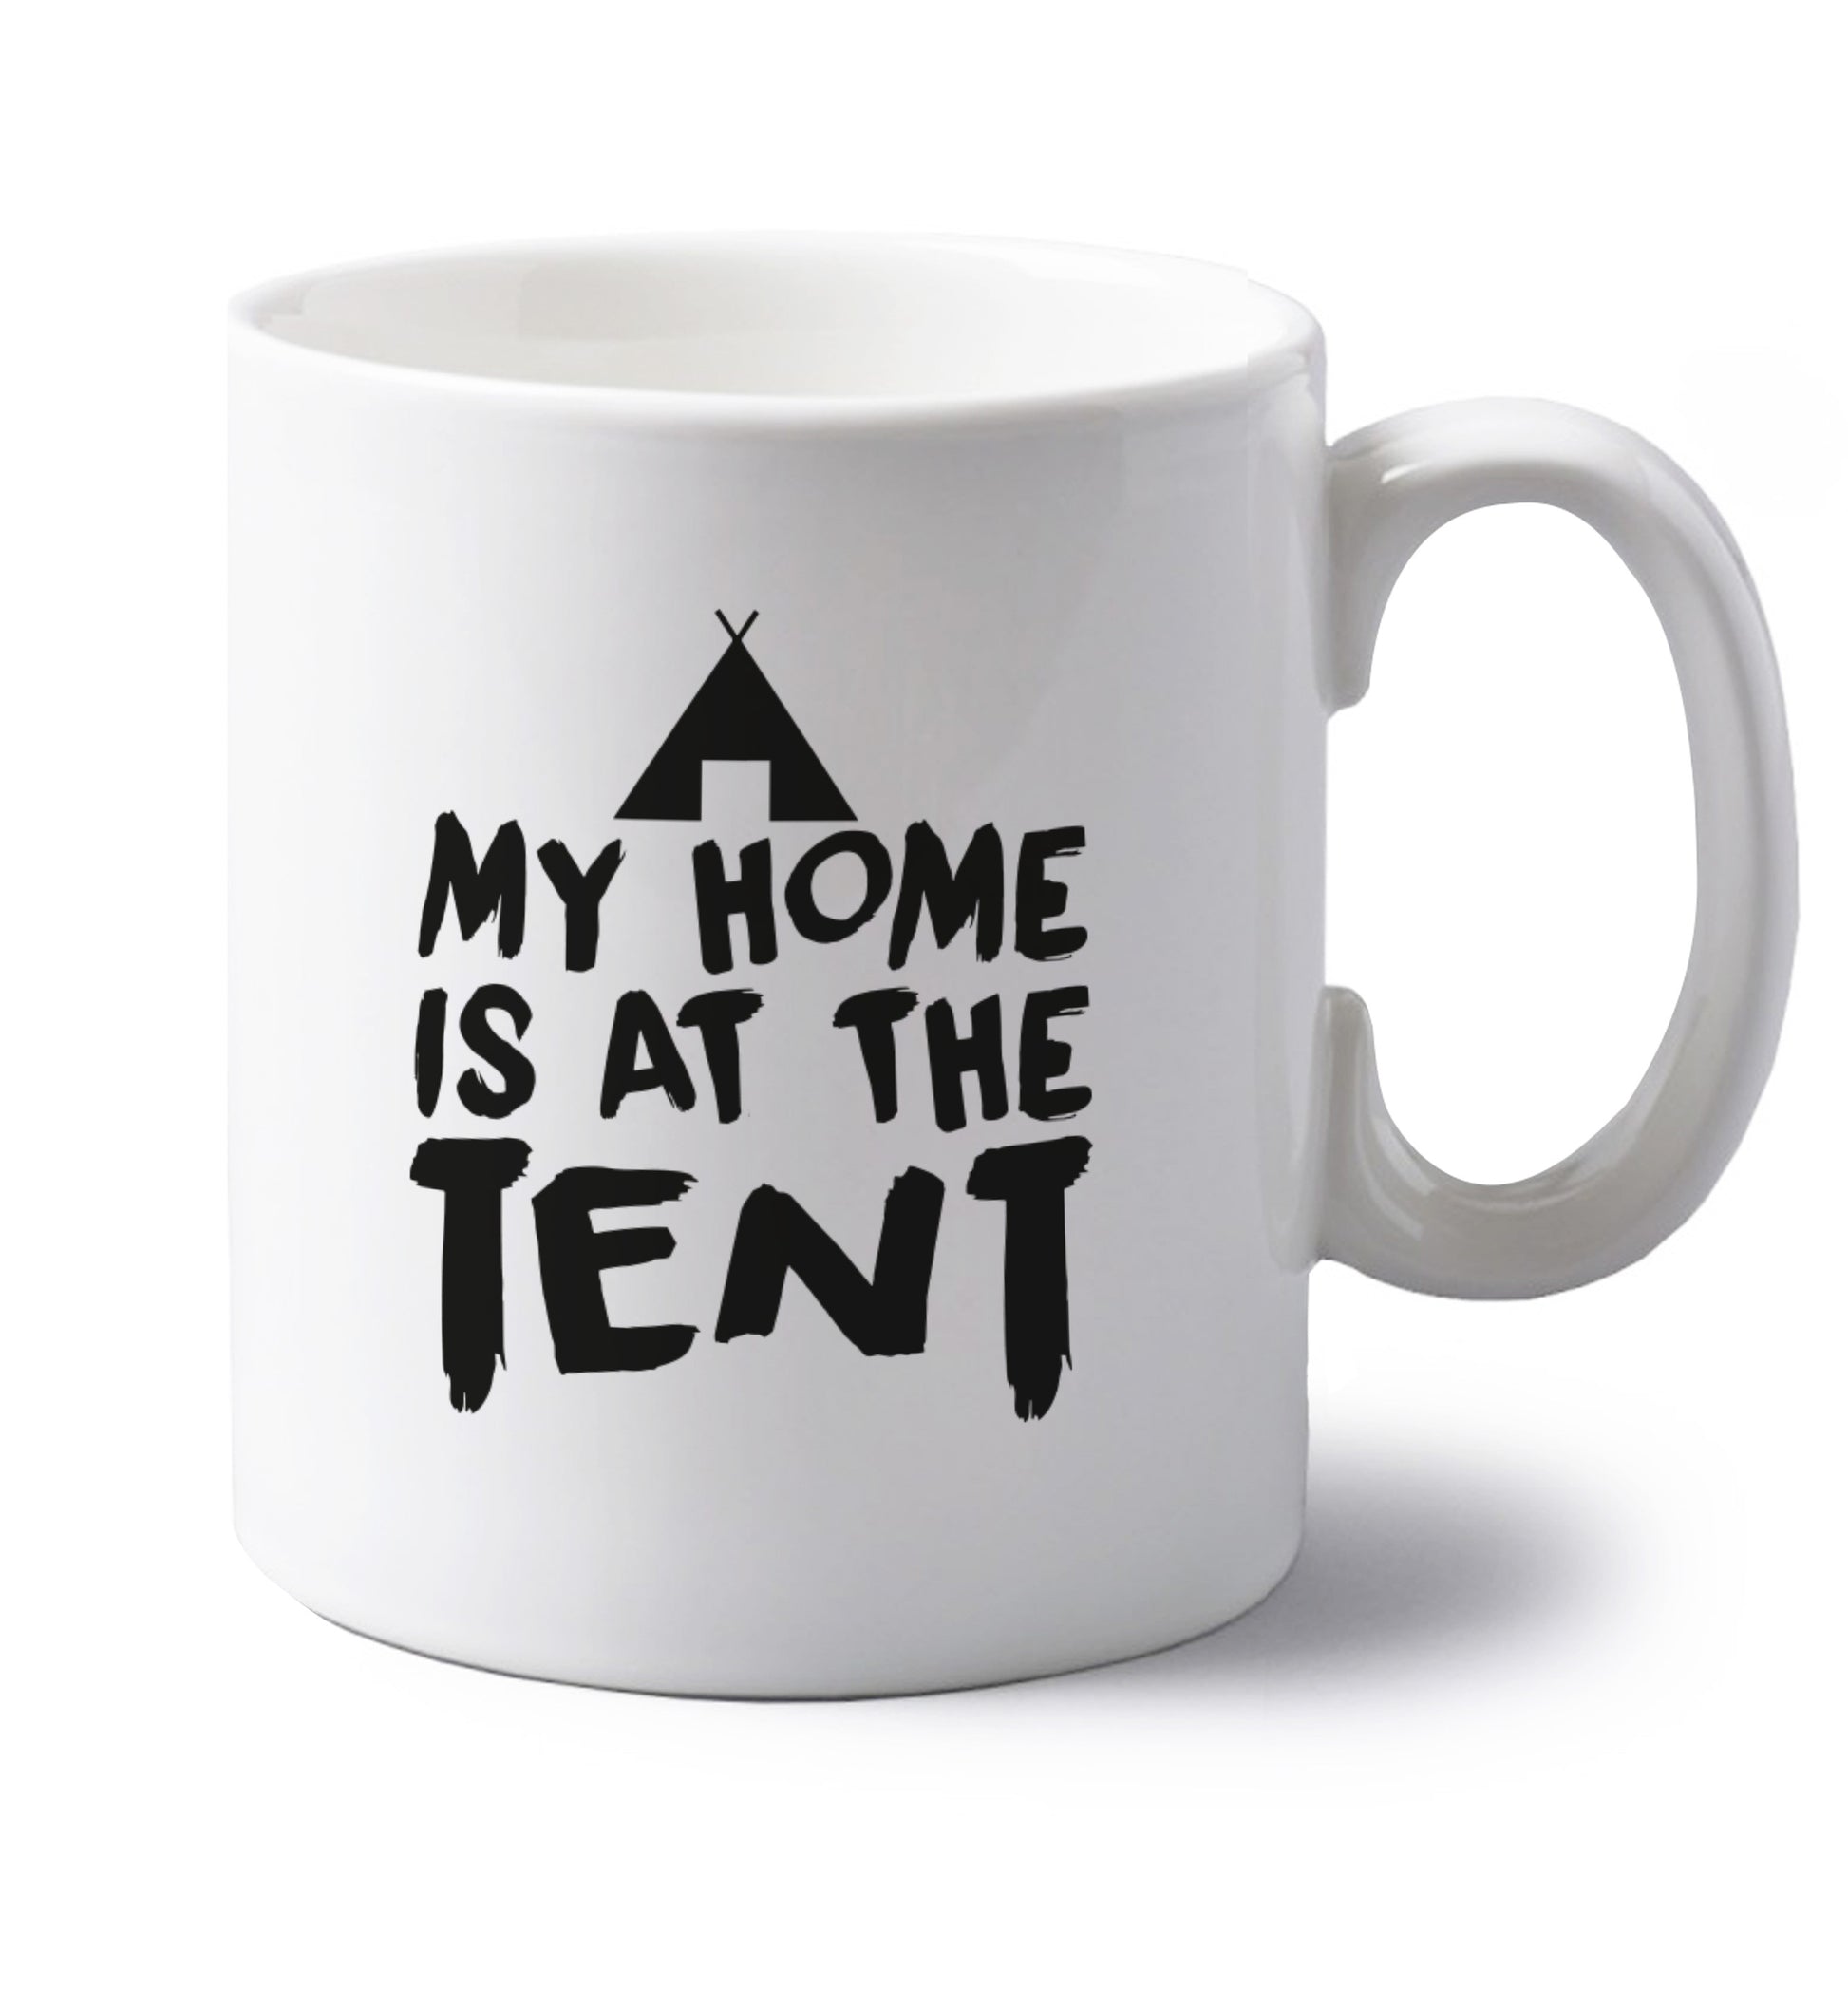 My home is at the tent left handed white ceramic mug 